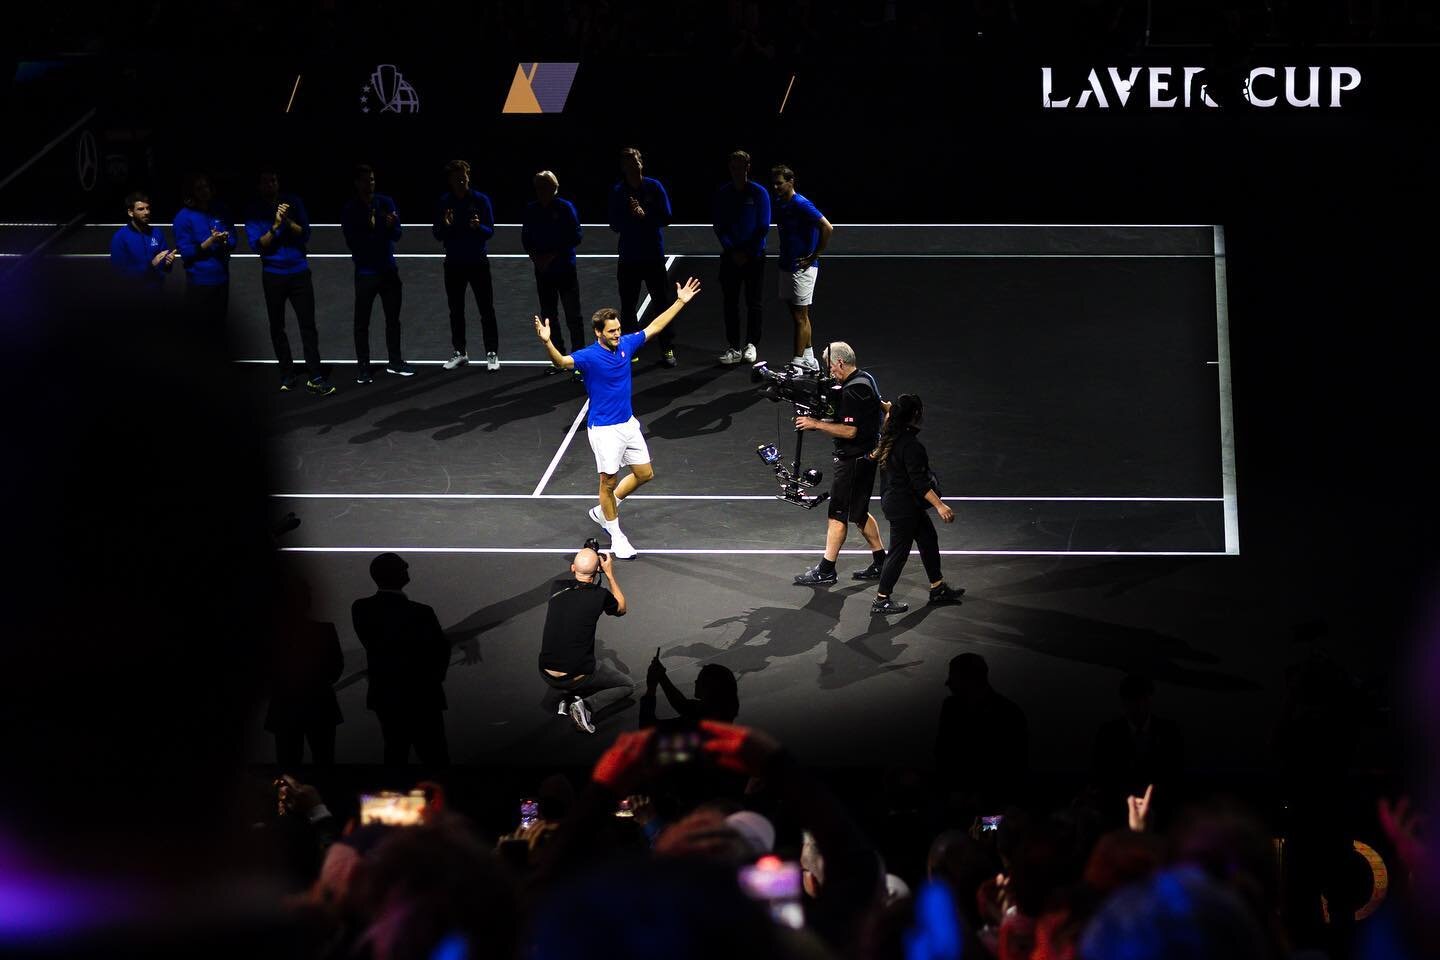 and an emotional ending.

Thanks for being your guest for my first and my last time.  @rogerfederer #lavercup2022